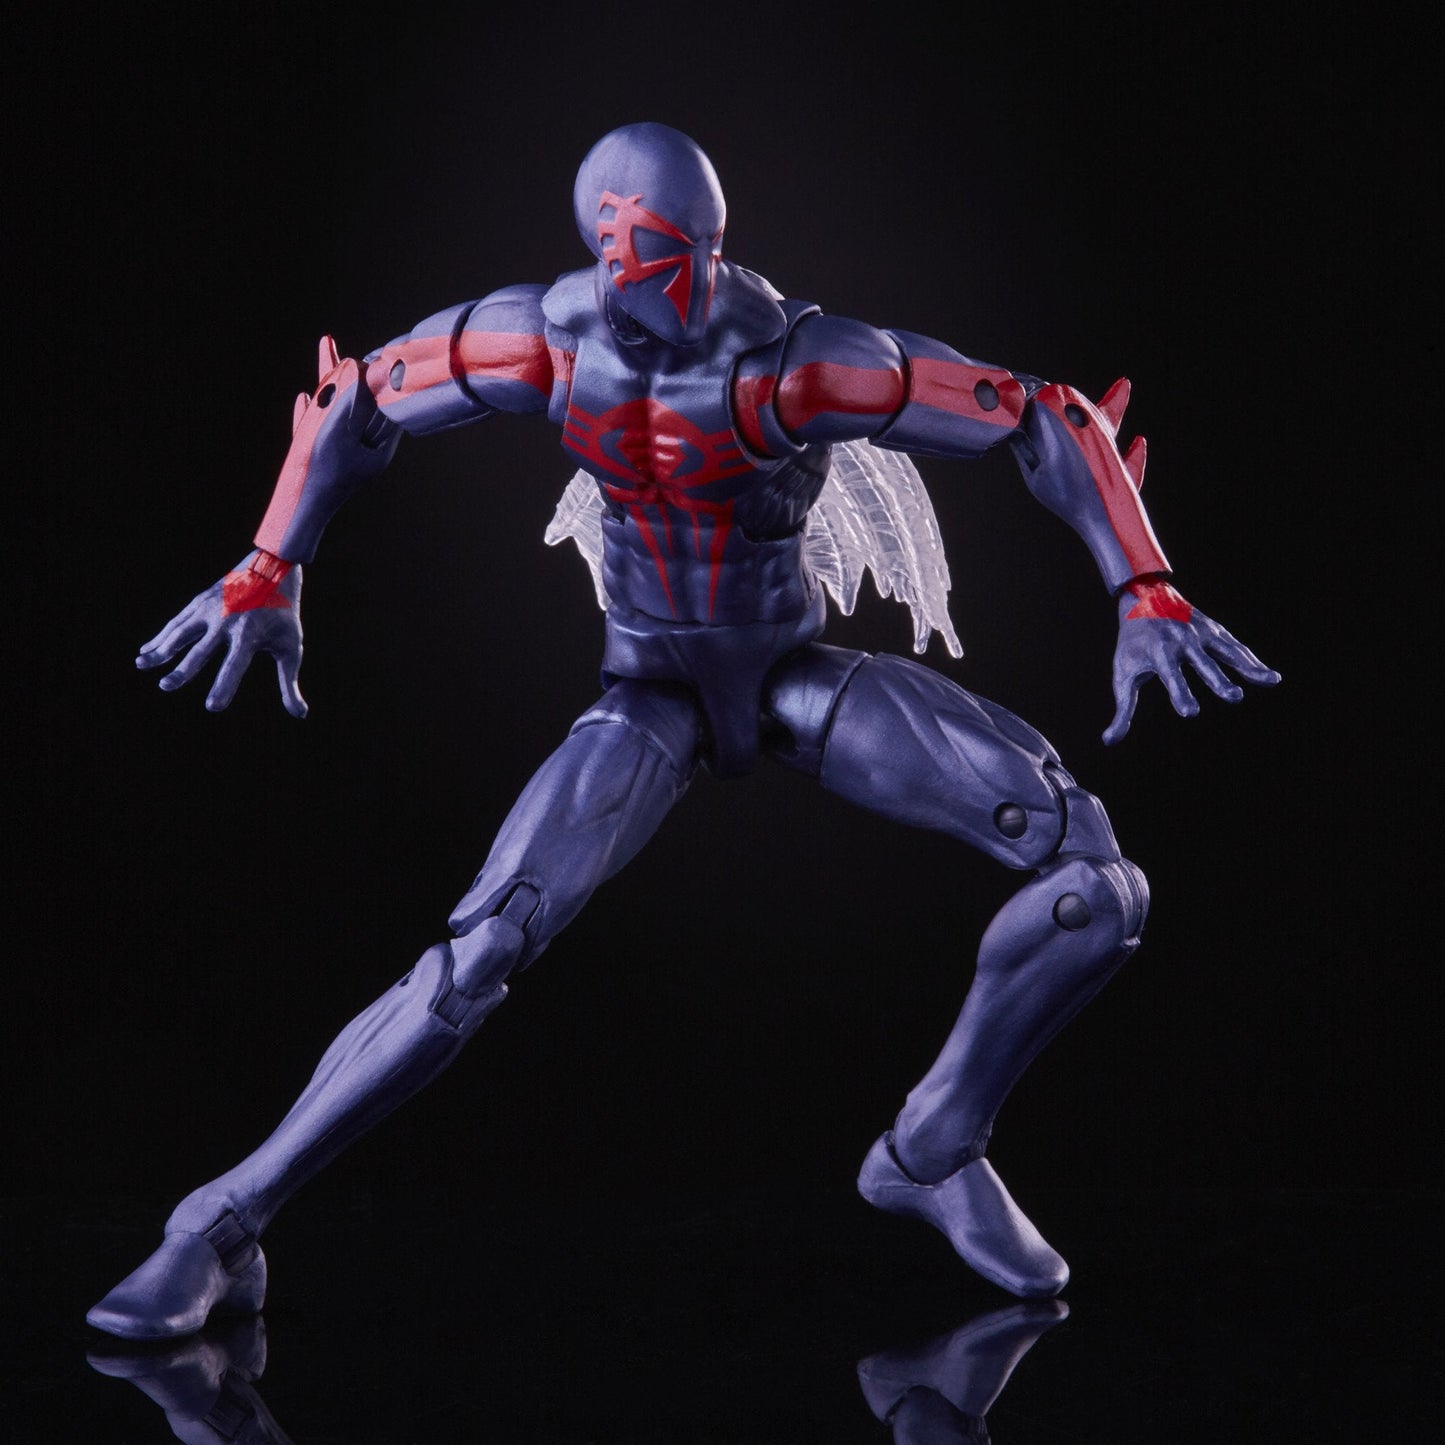 NON MINT Marvel Legends Spider-Man 2099 6-Inch Action Figure (IMPORT STOCK)